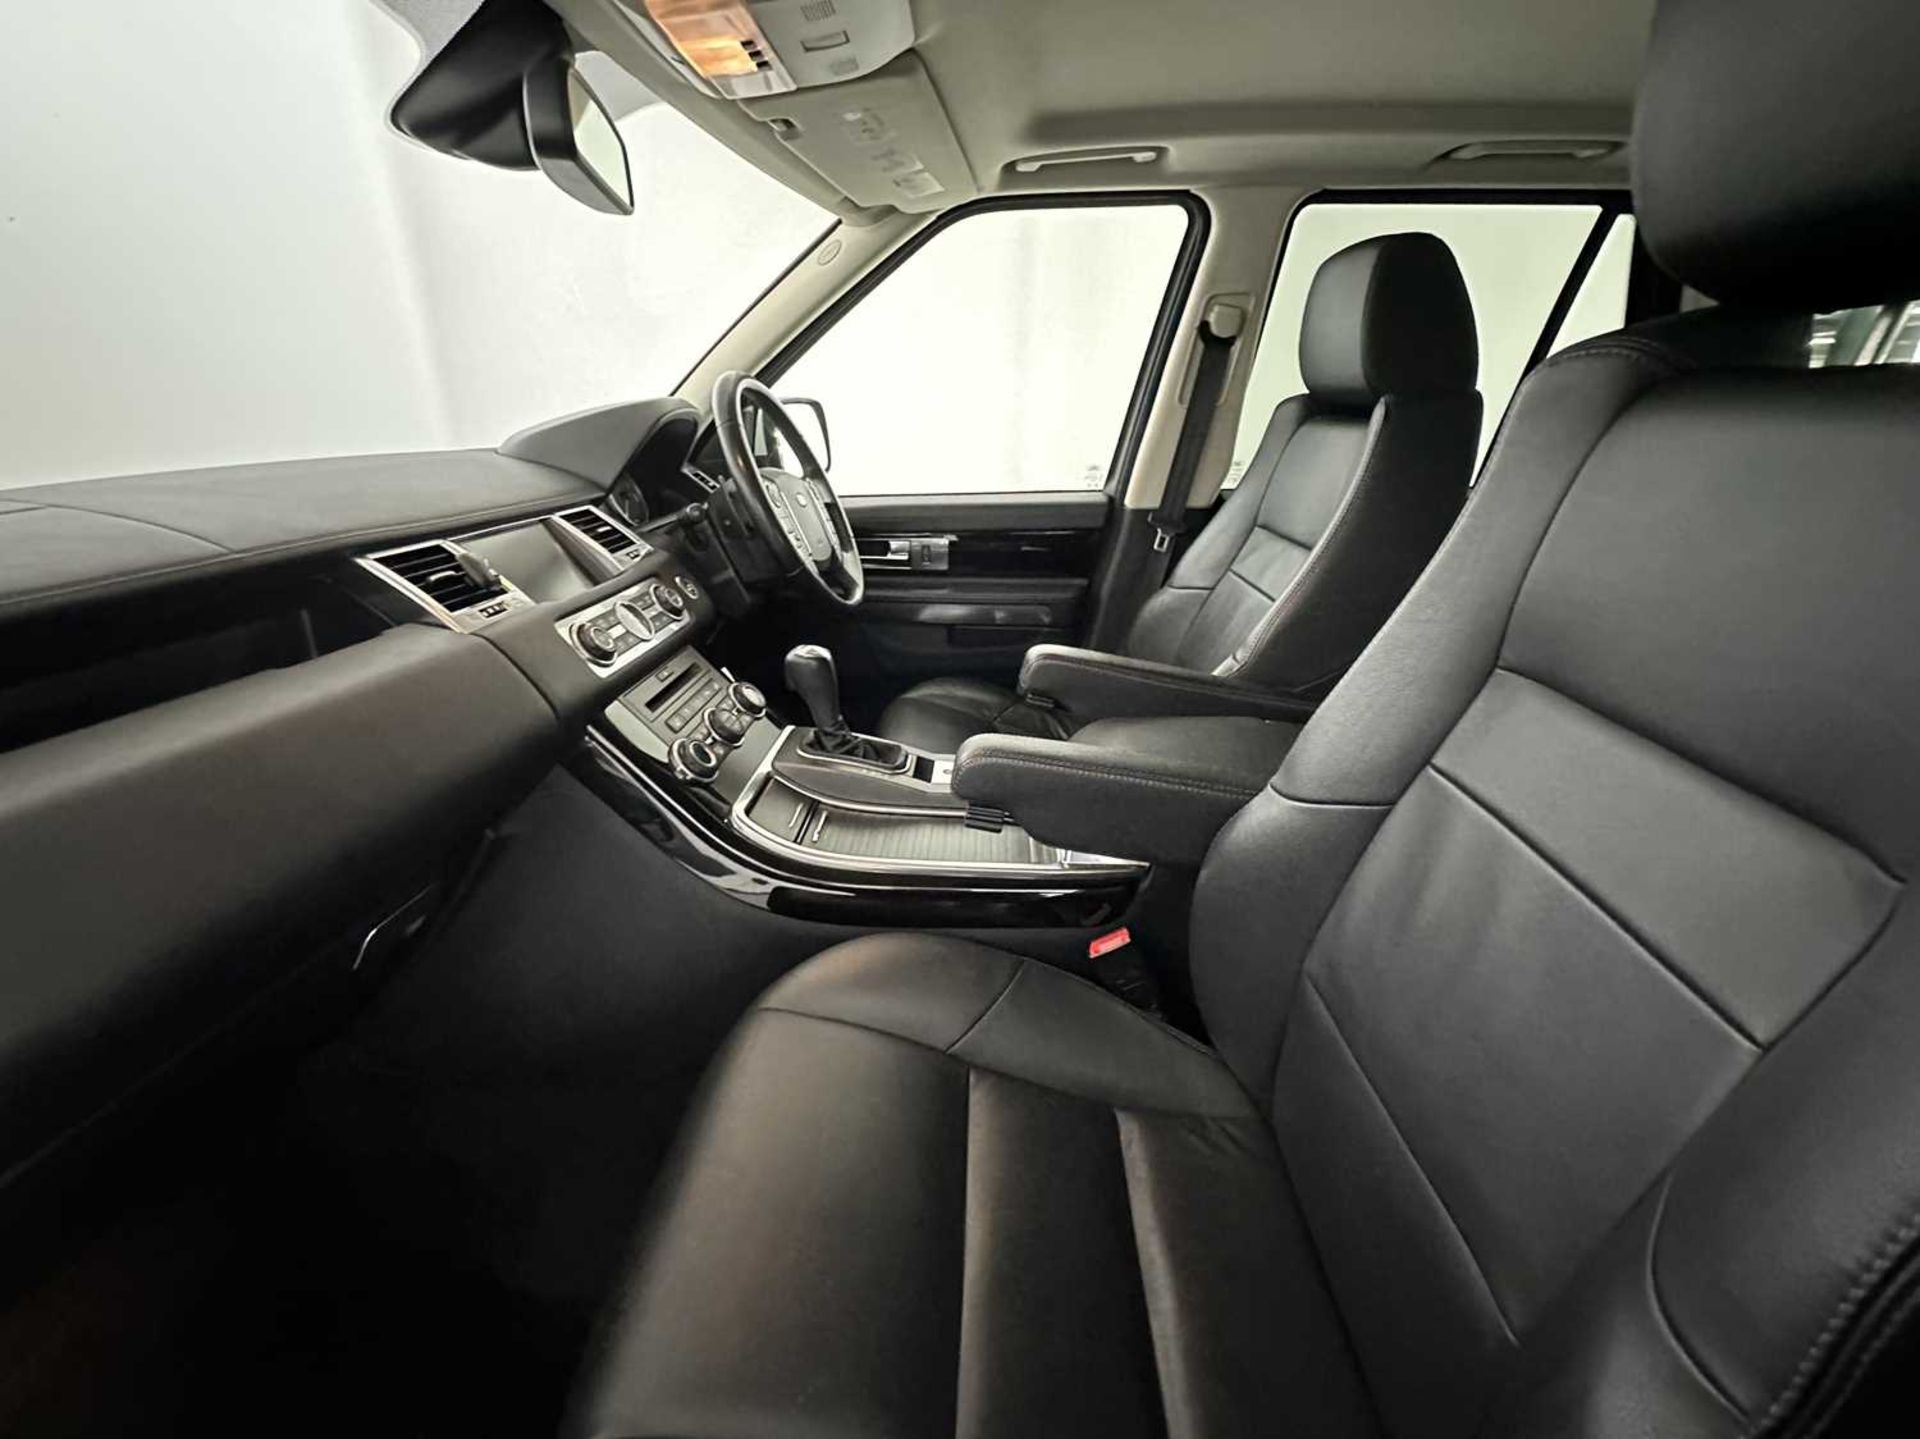 2011 Land Rover Range Rover Sport Stormer Edition  - Image 27 of 33